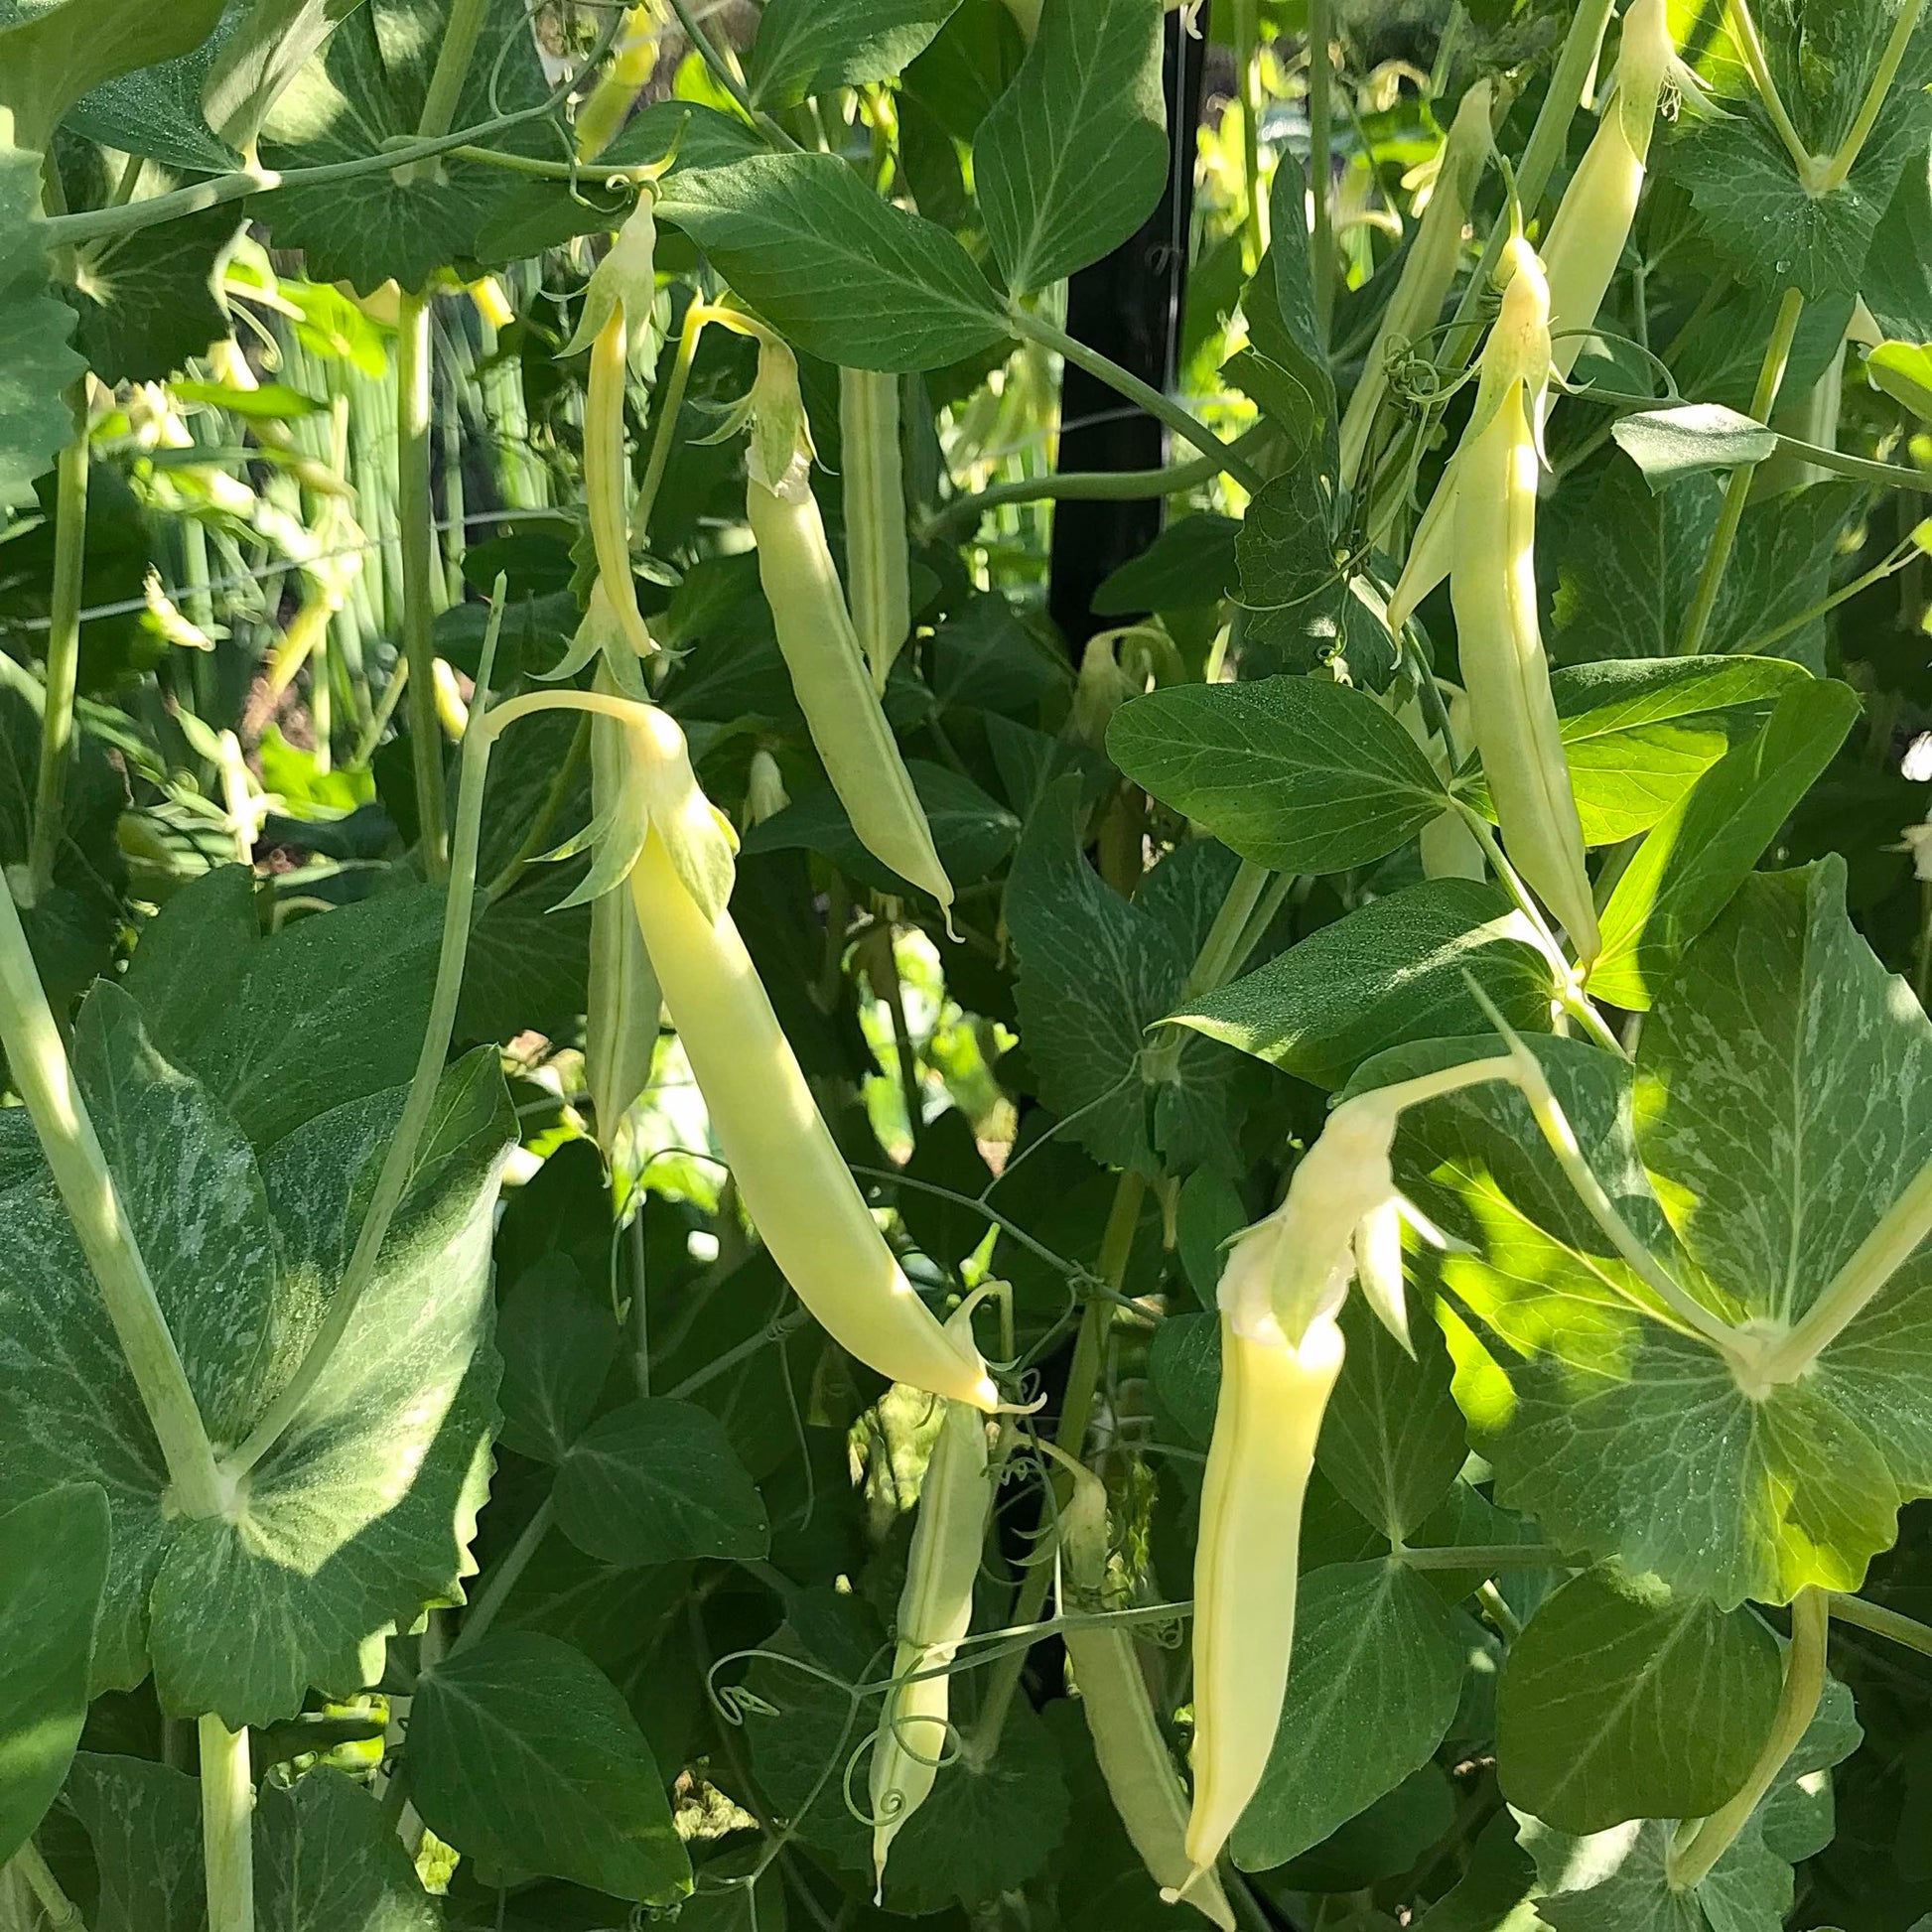 Close view of yellow snap pea pods on their vines.